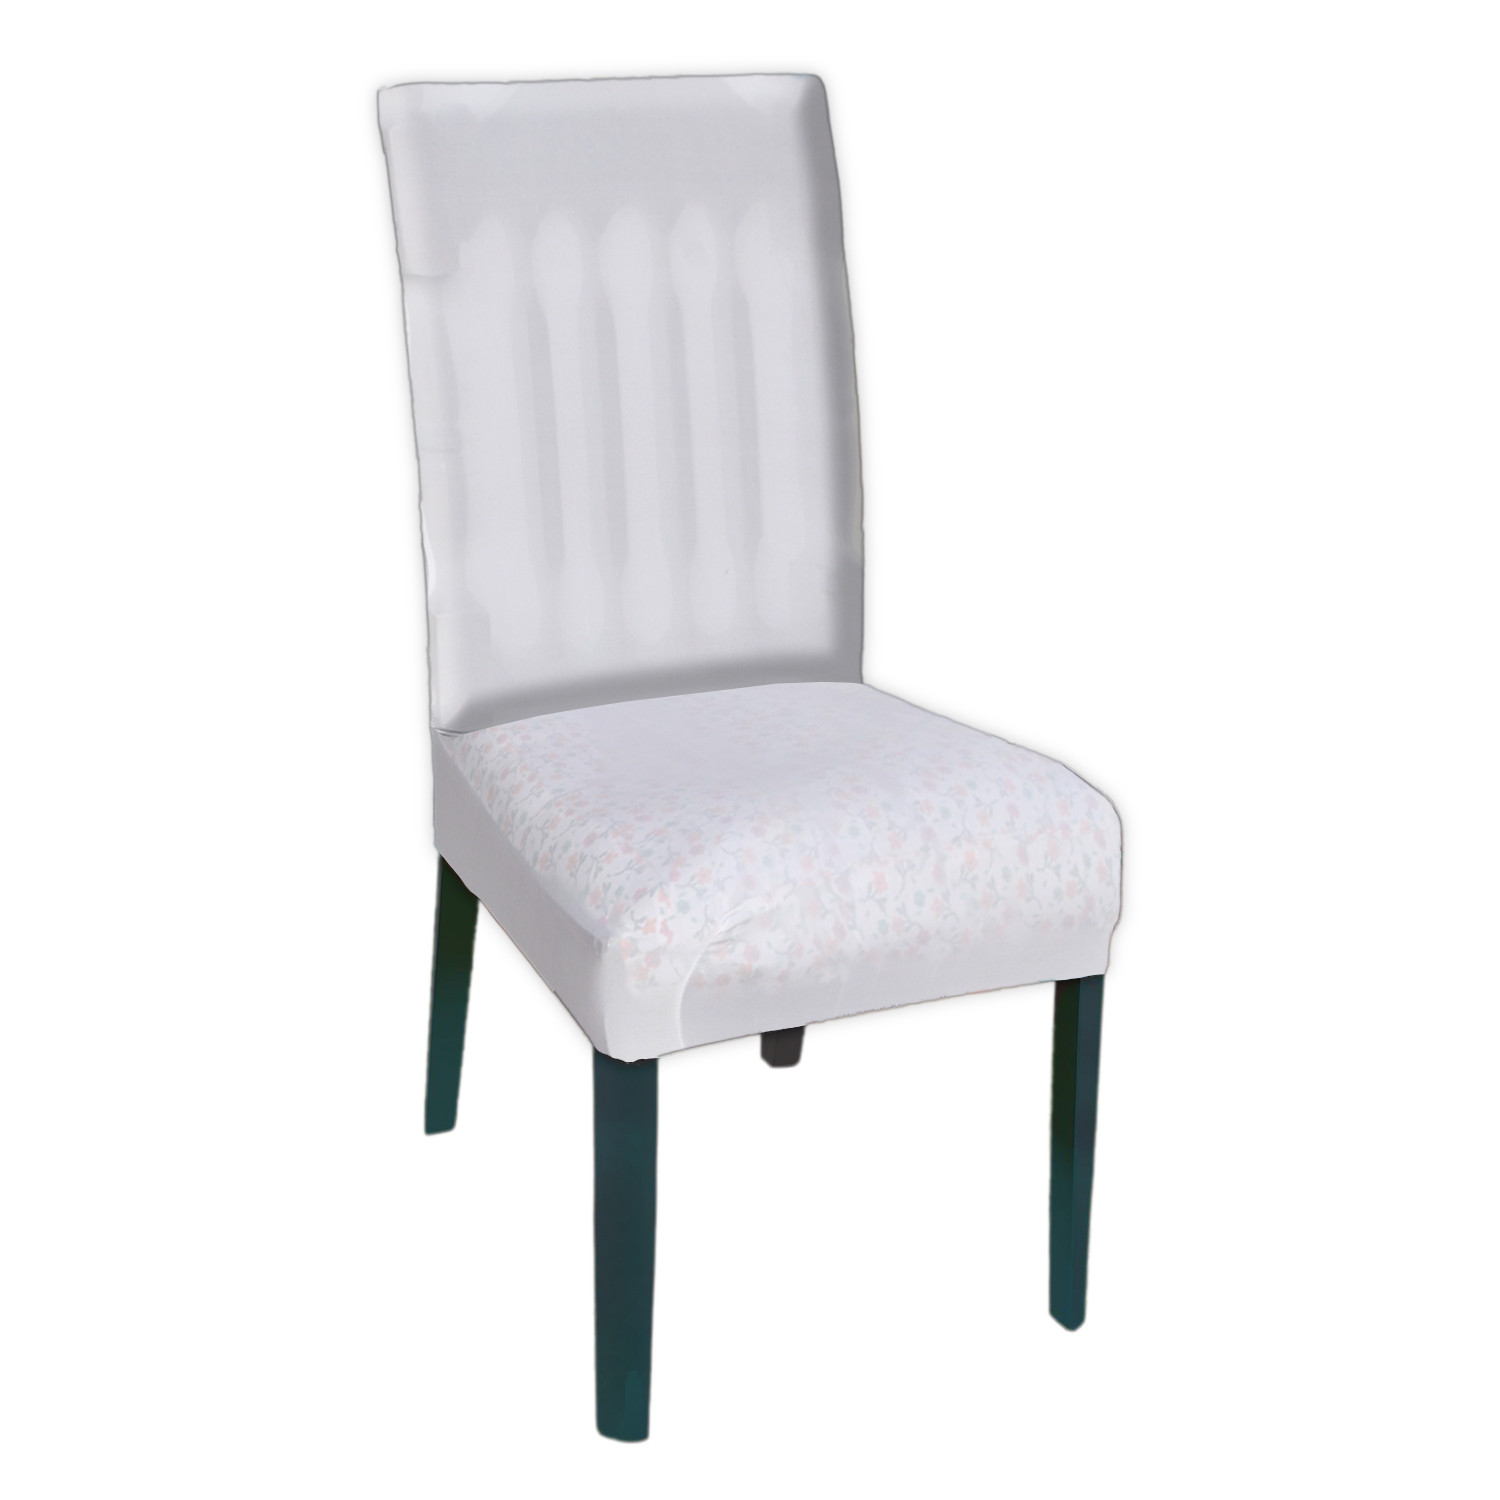 Kuber Industries Elastic Stretchable Polyster Chair Cover For Home, Office, Hotels, Wedding Banquet (White)